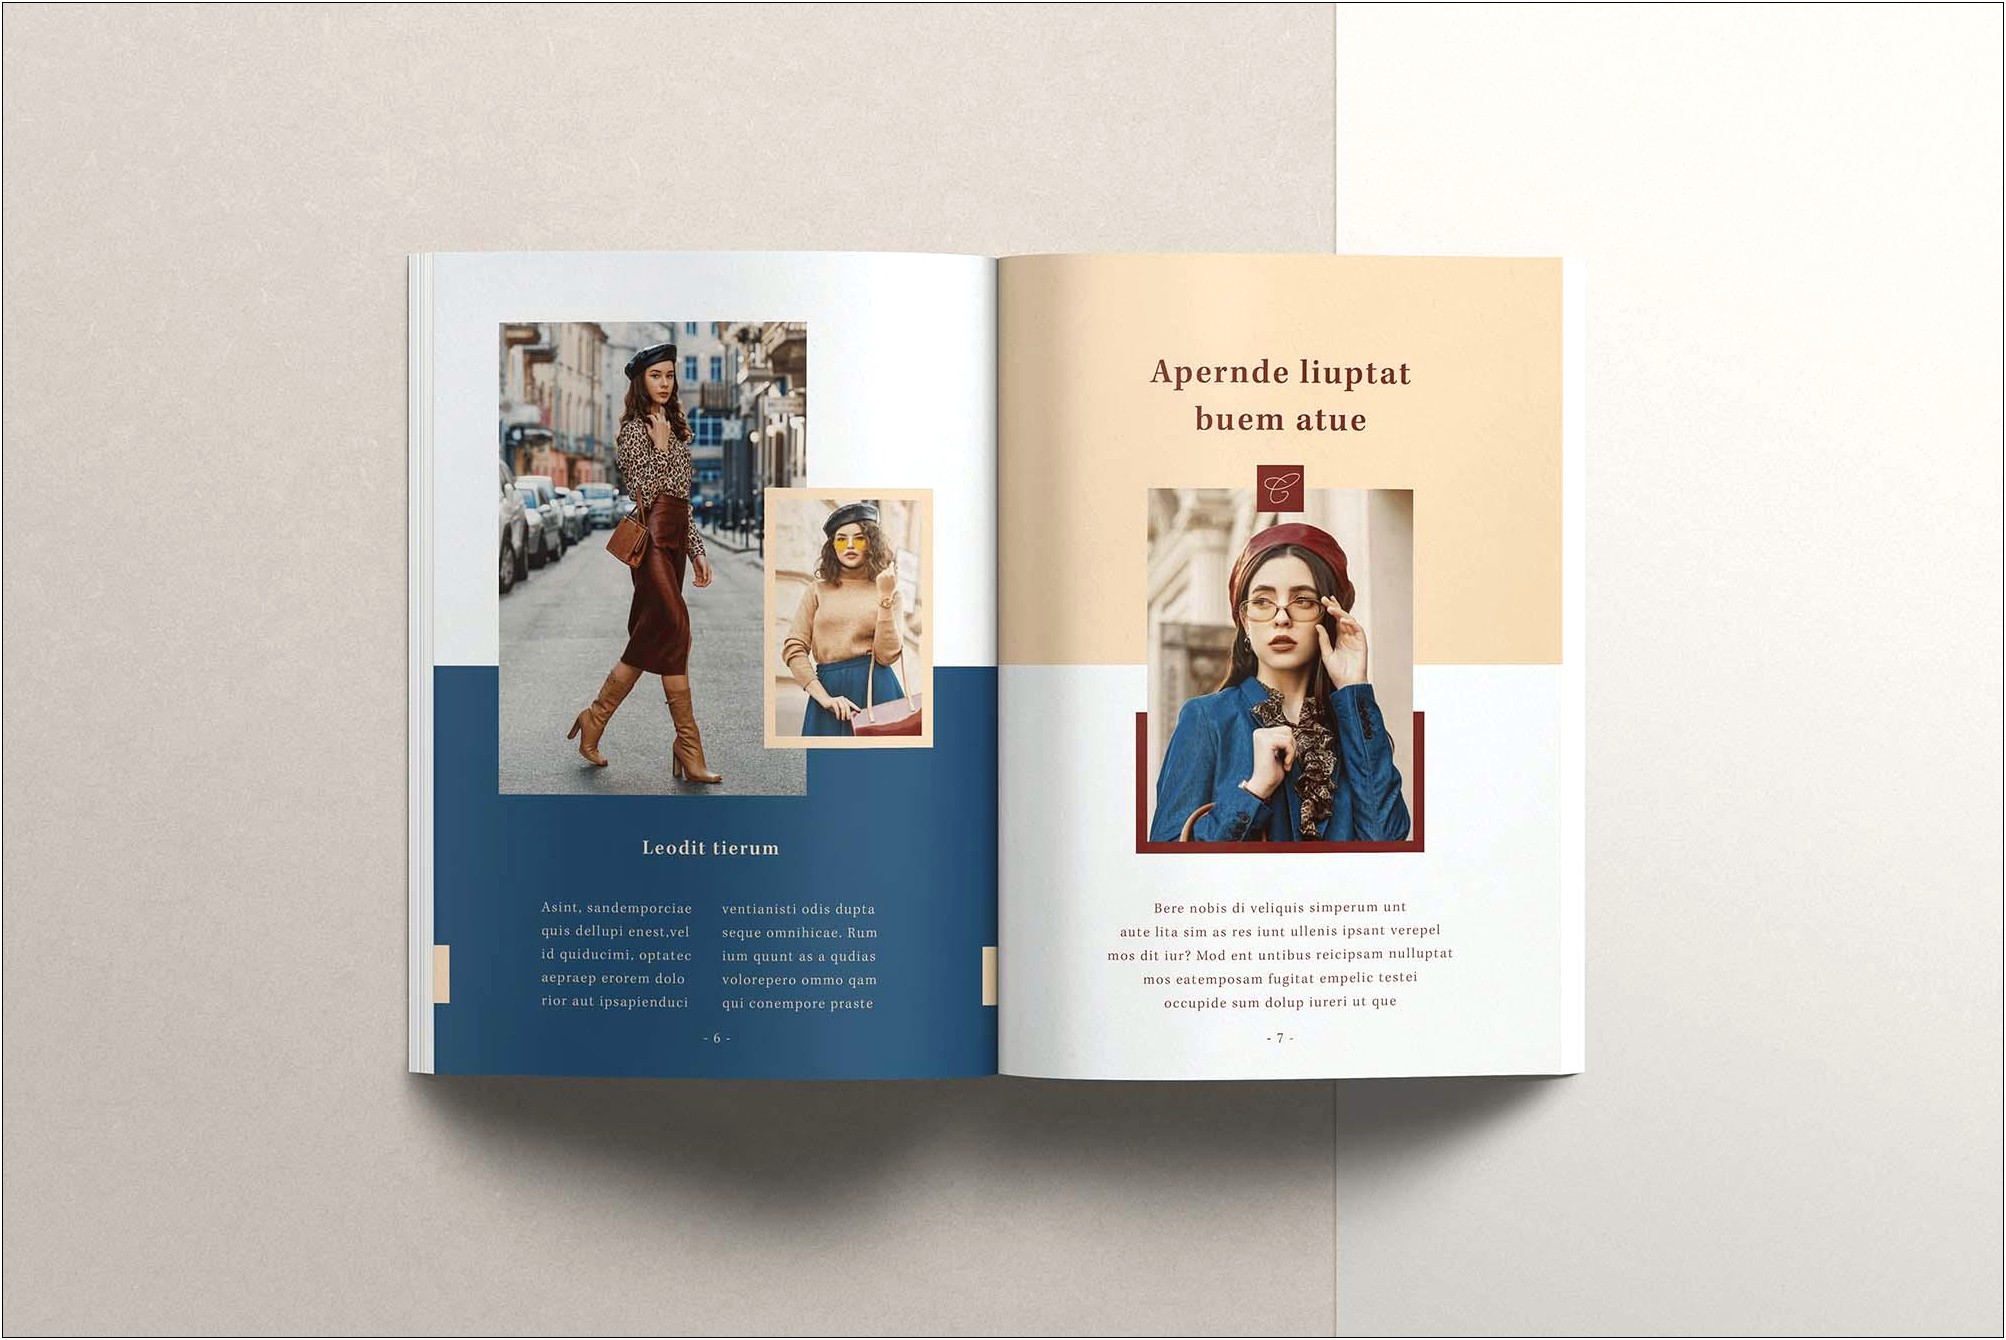 Magazine Template Indesign 56 Page Layout V2 Free